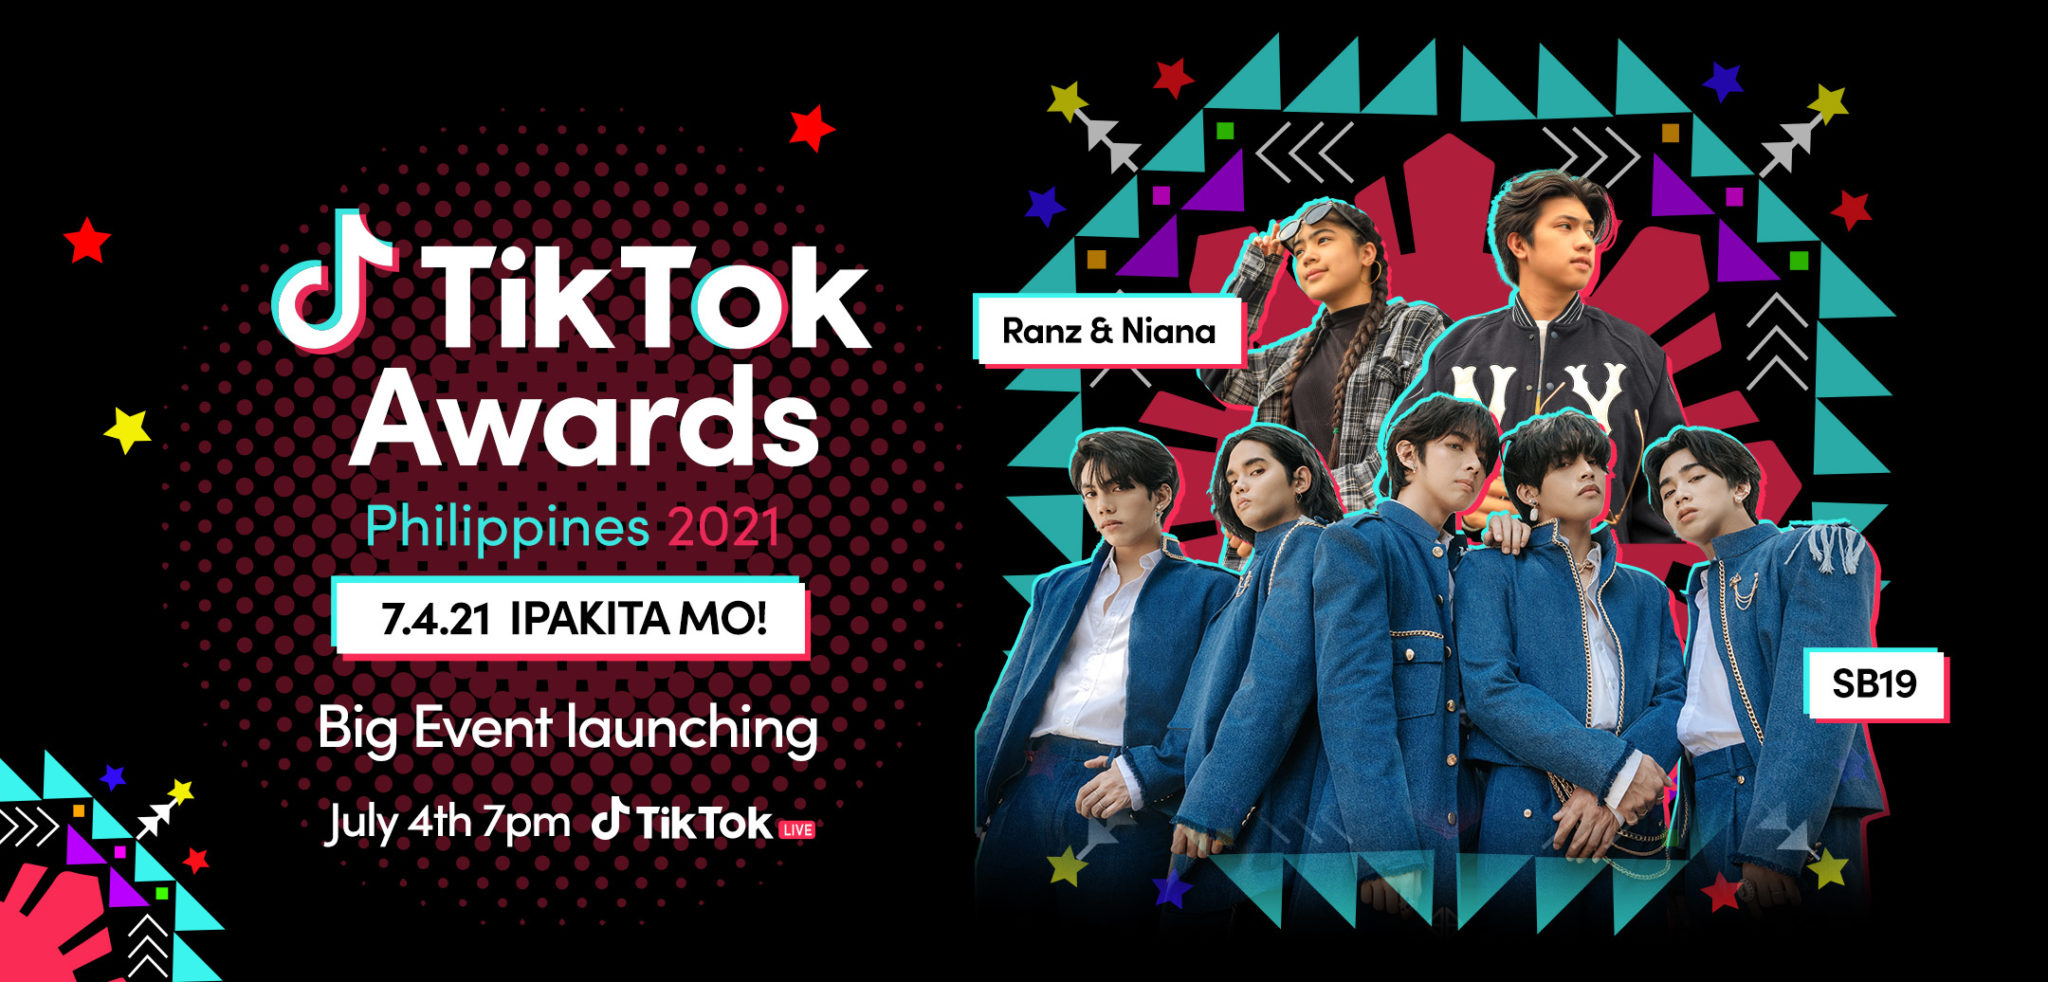 Here’s everything you need to know about the 1st TikTok Awards event in PH